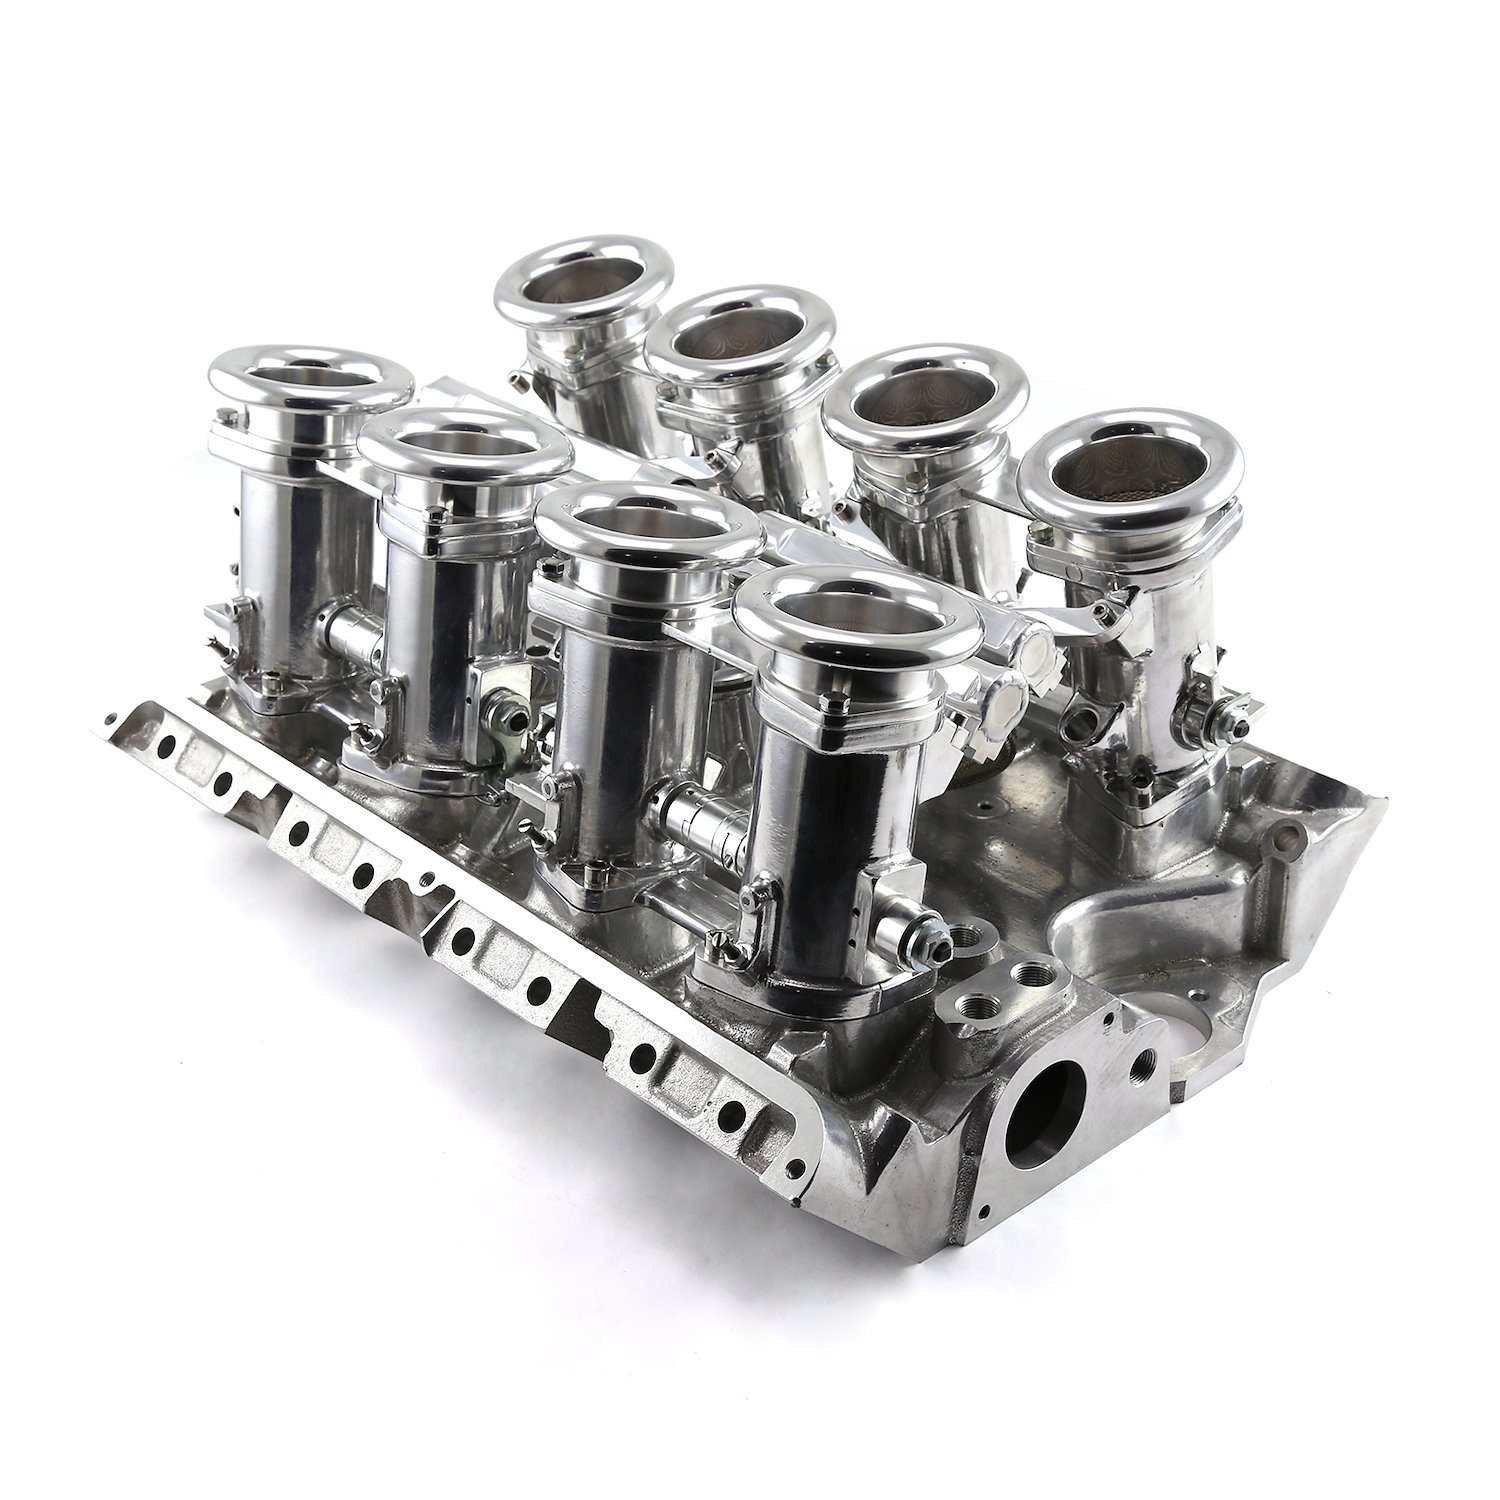 Downdraft EFI Stack Intake Manifold - Ford FE 390/427/428 Fuel Injected